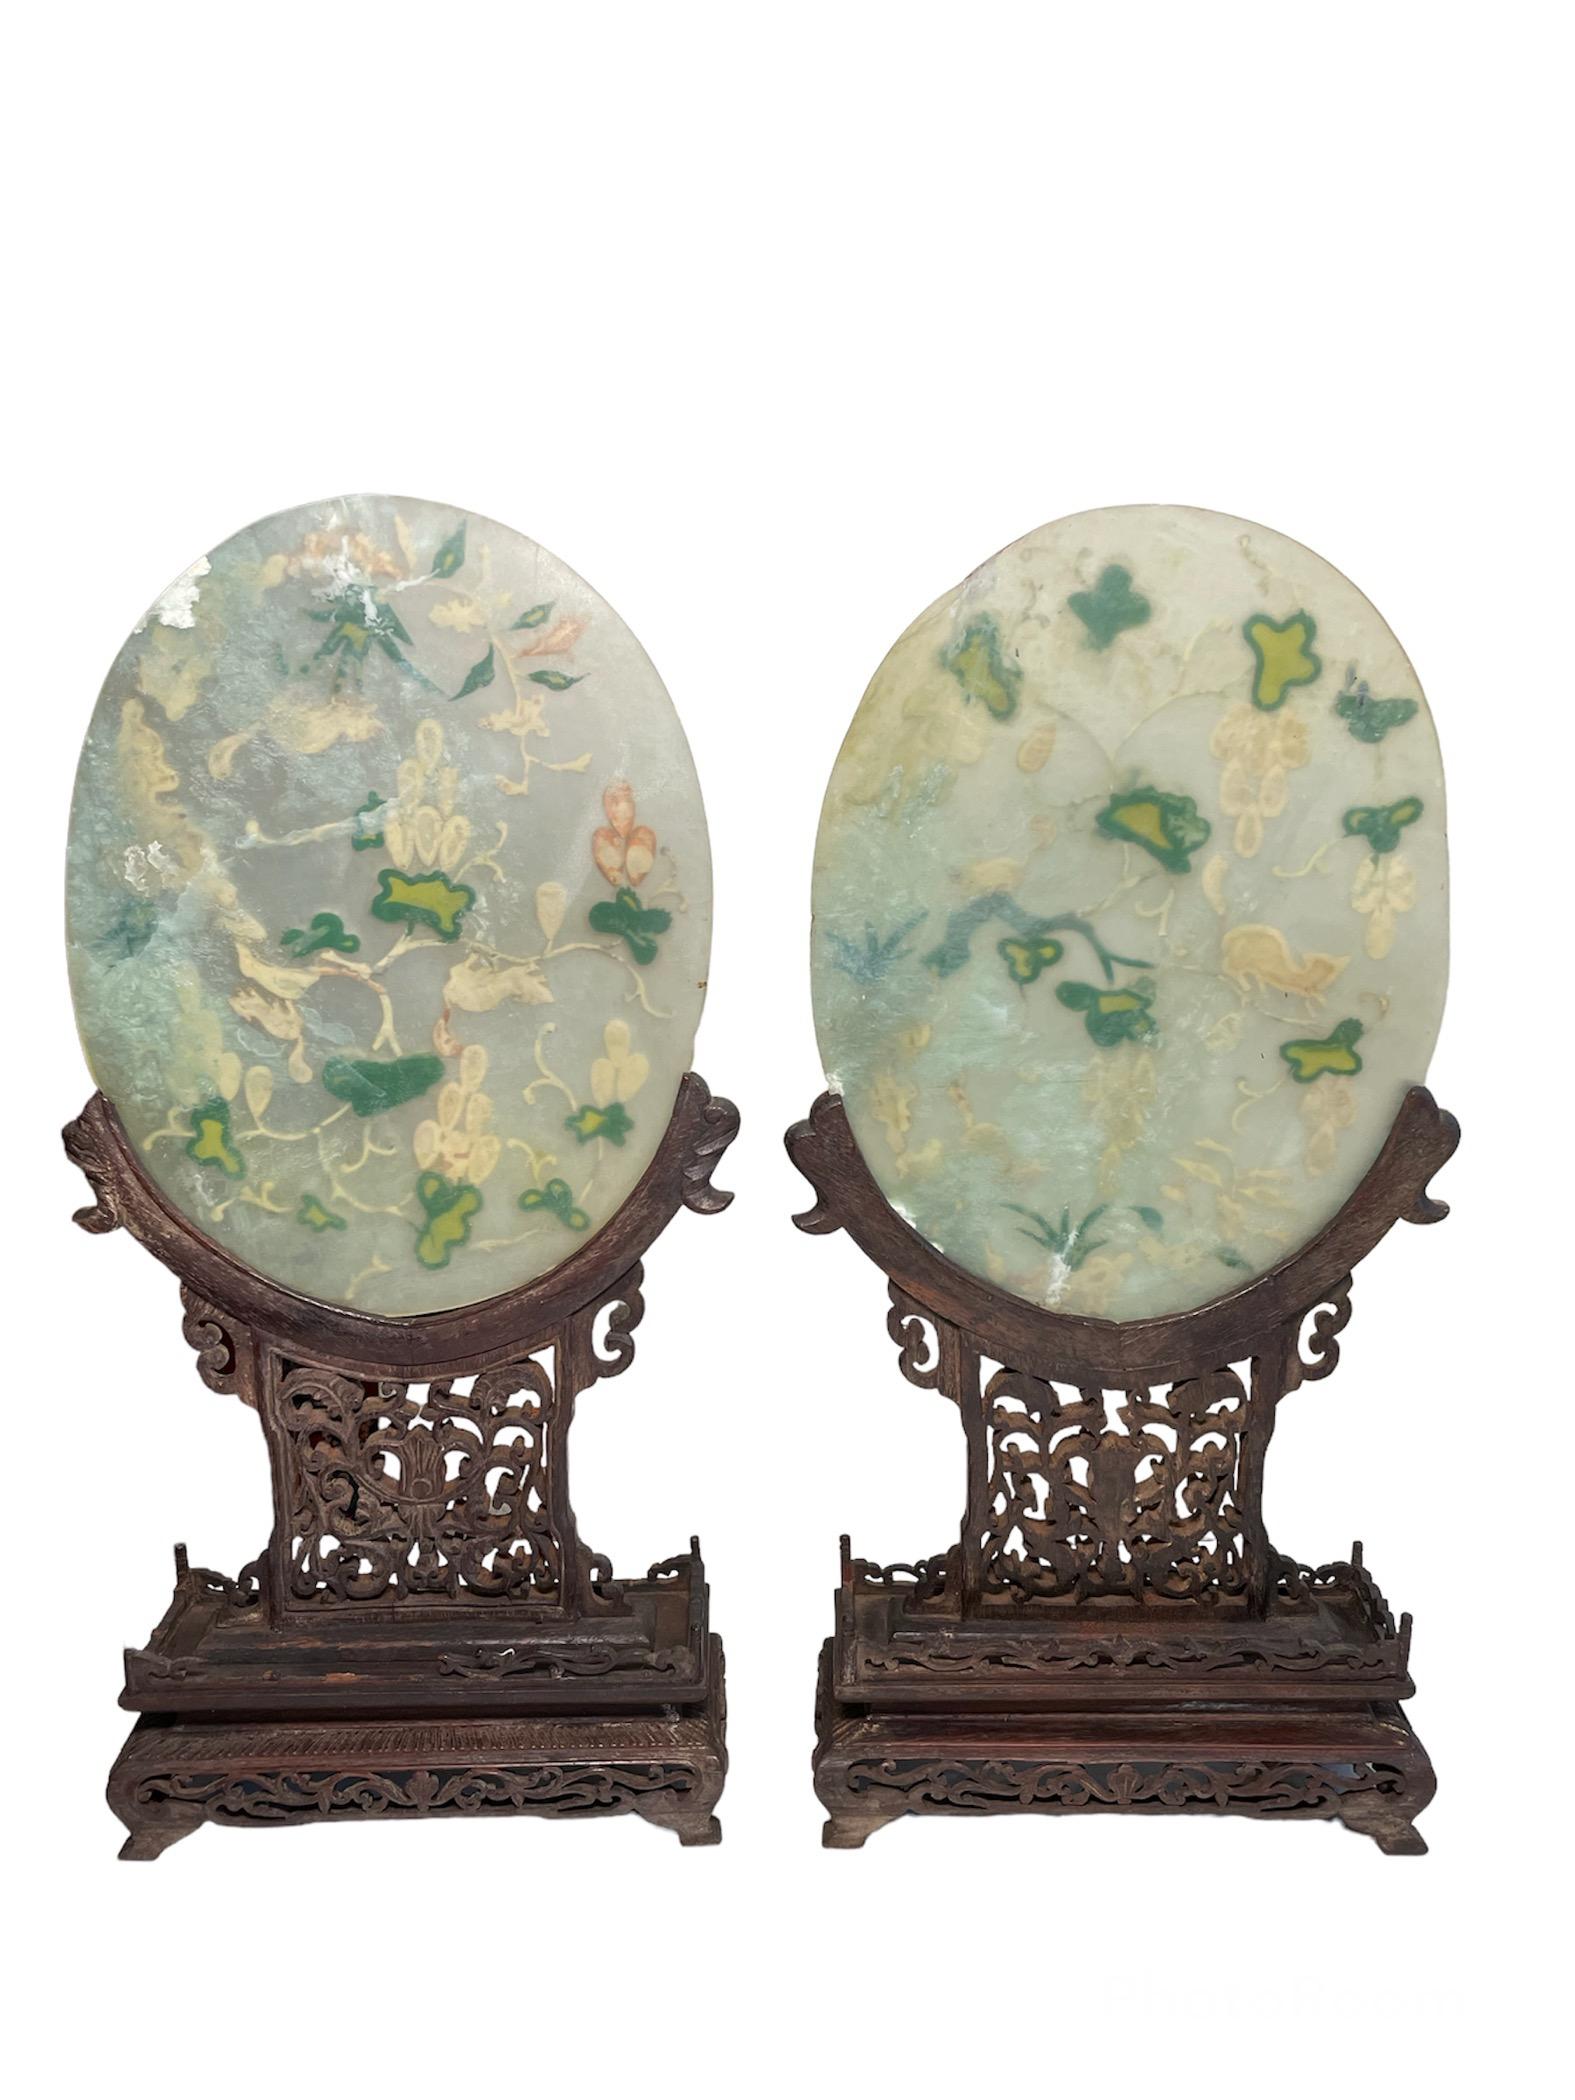 Pair of Chinese Hand Carved Jade and Wood Table Screens For Sale 9